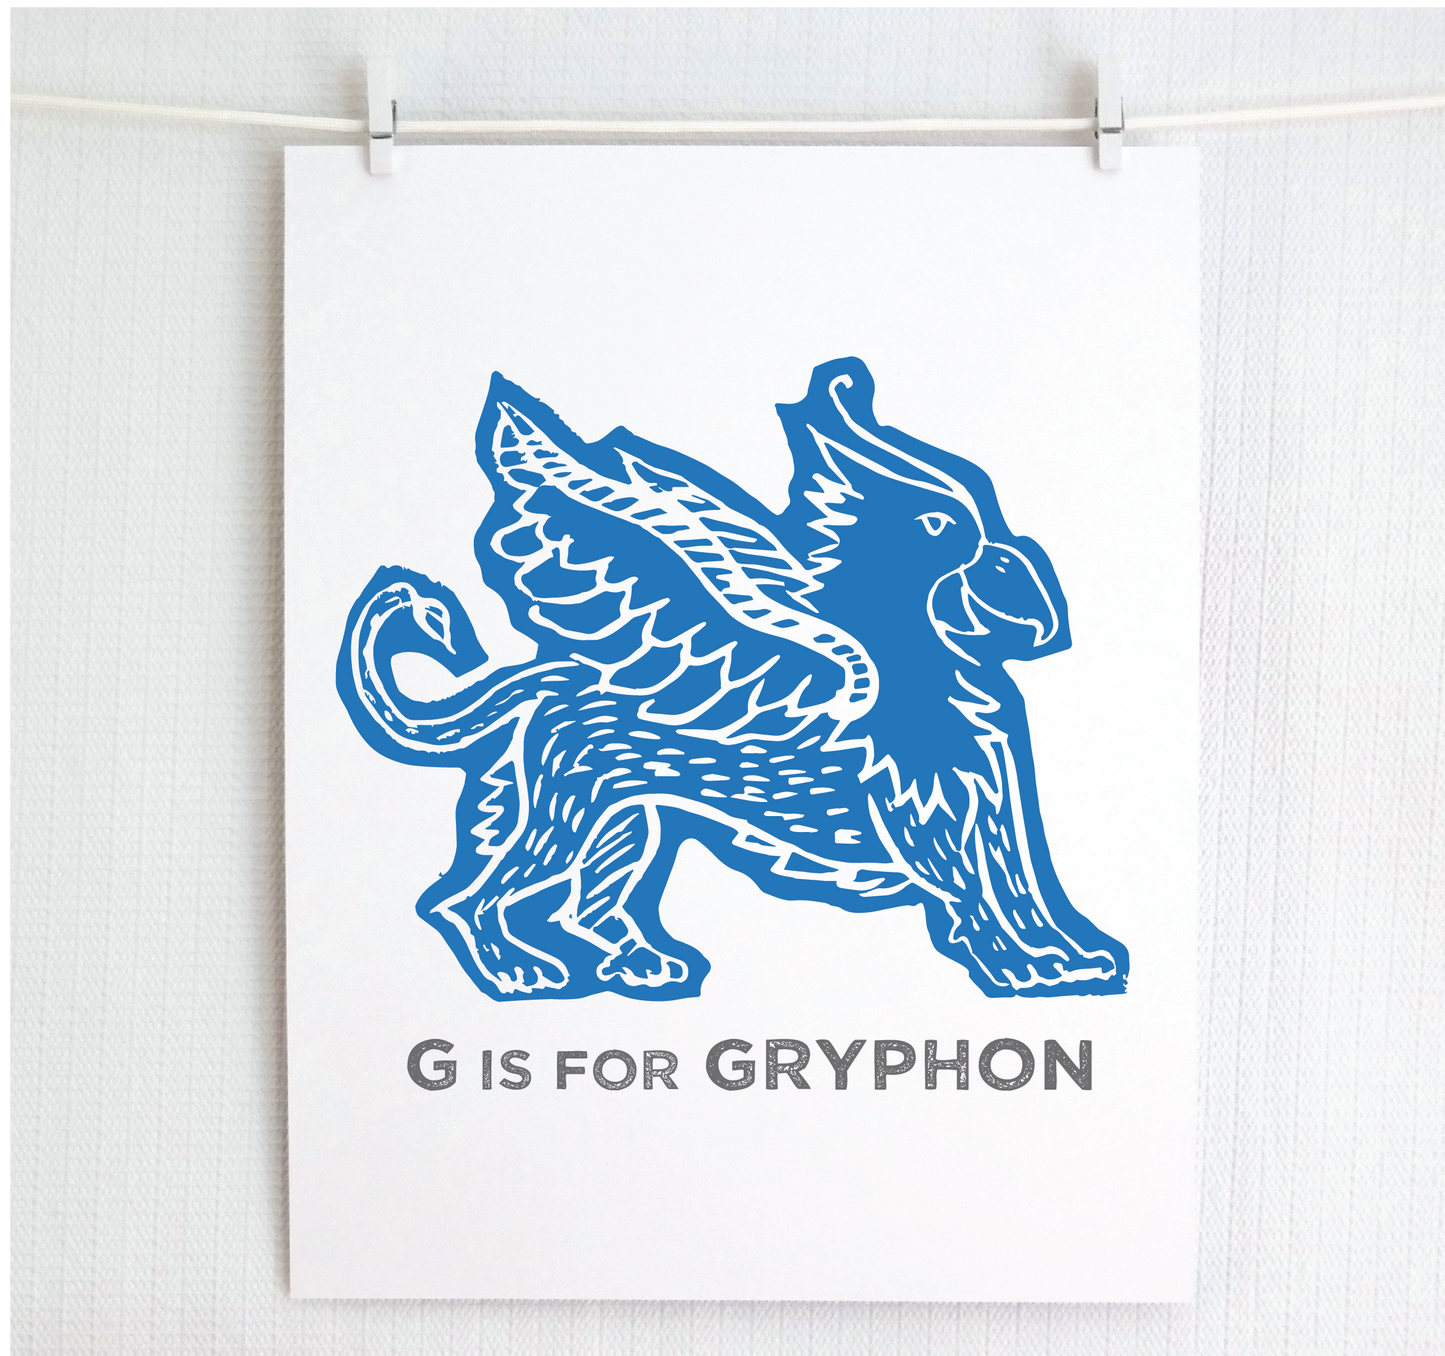 G is for Gryphon